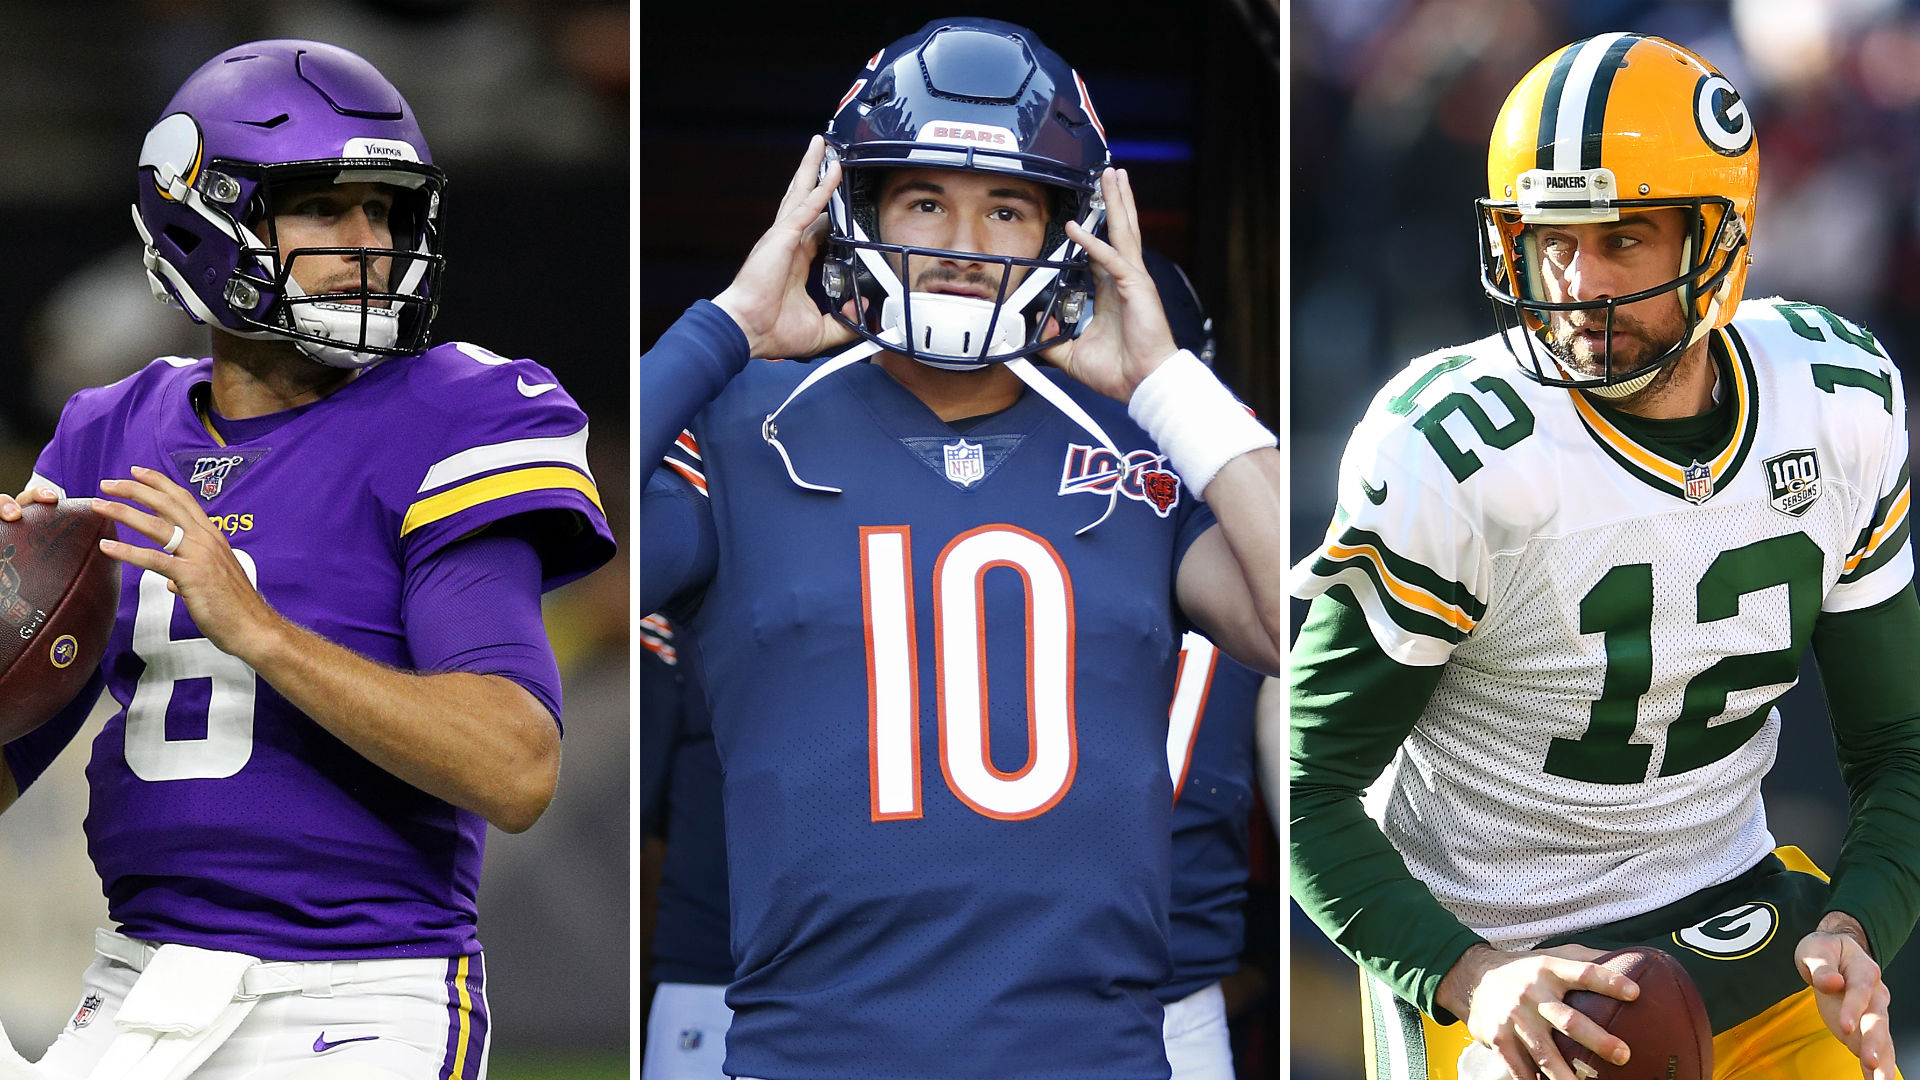 Flipboard: NFL preview 2019: NFC North player to watch, impact rookie, projected finish1920 x 1080